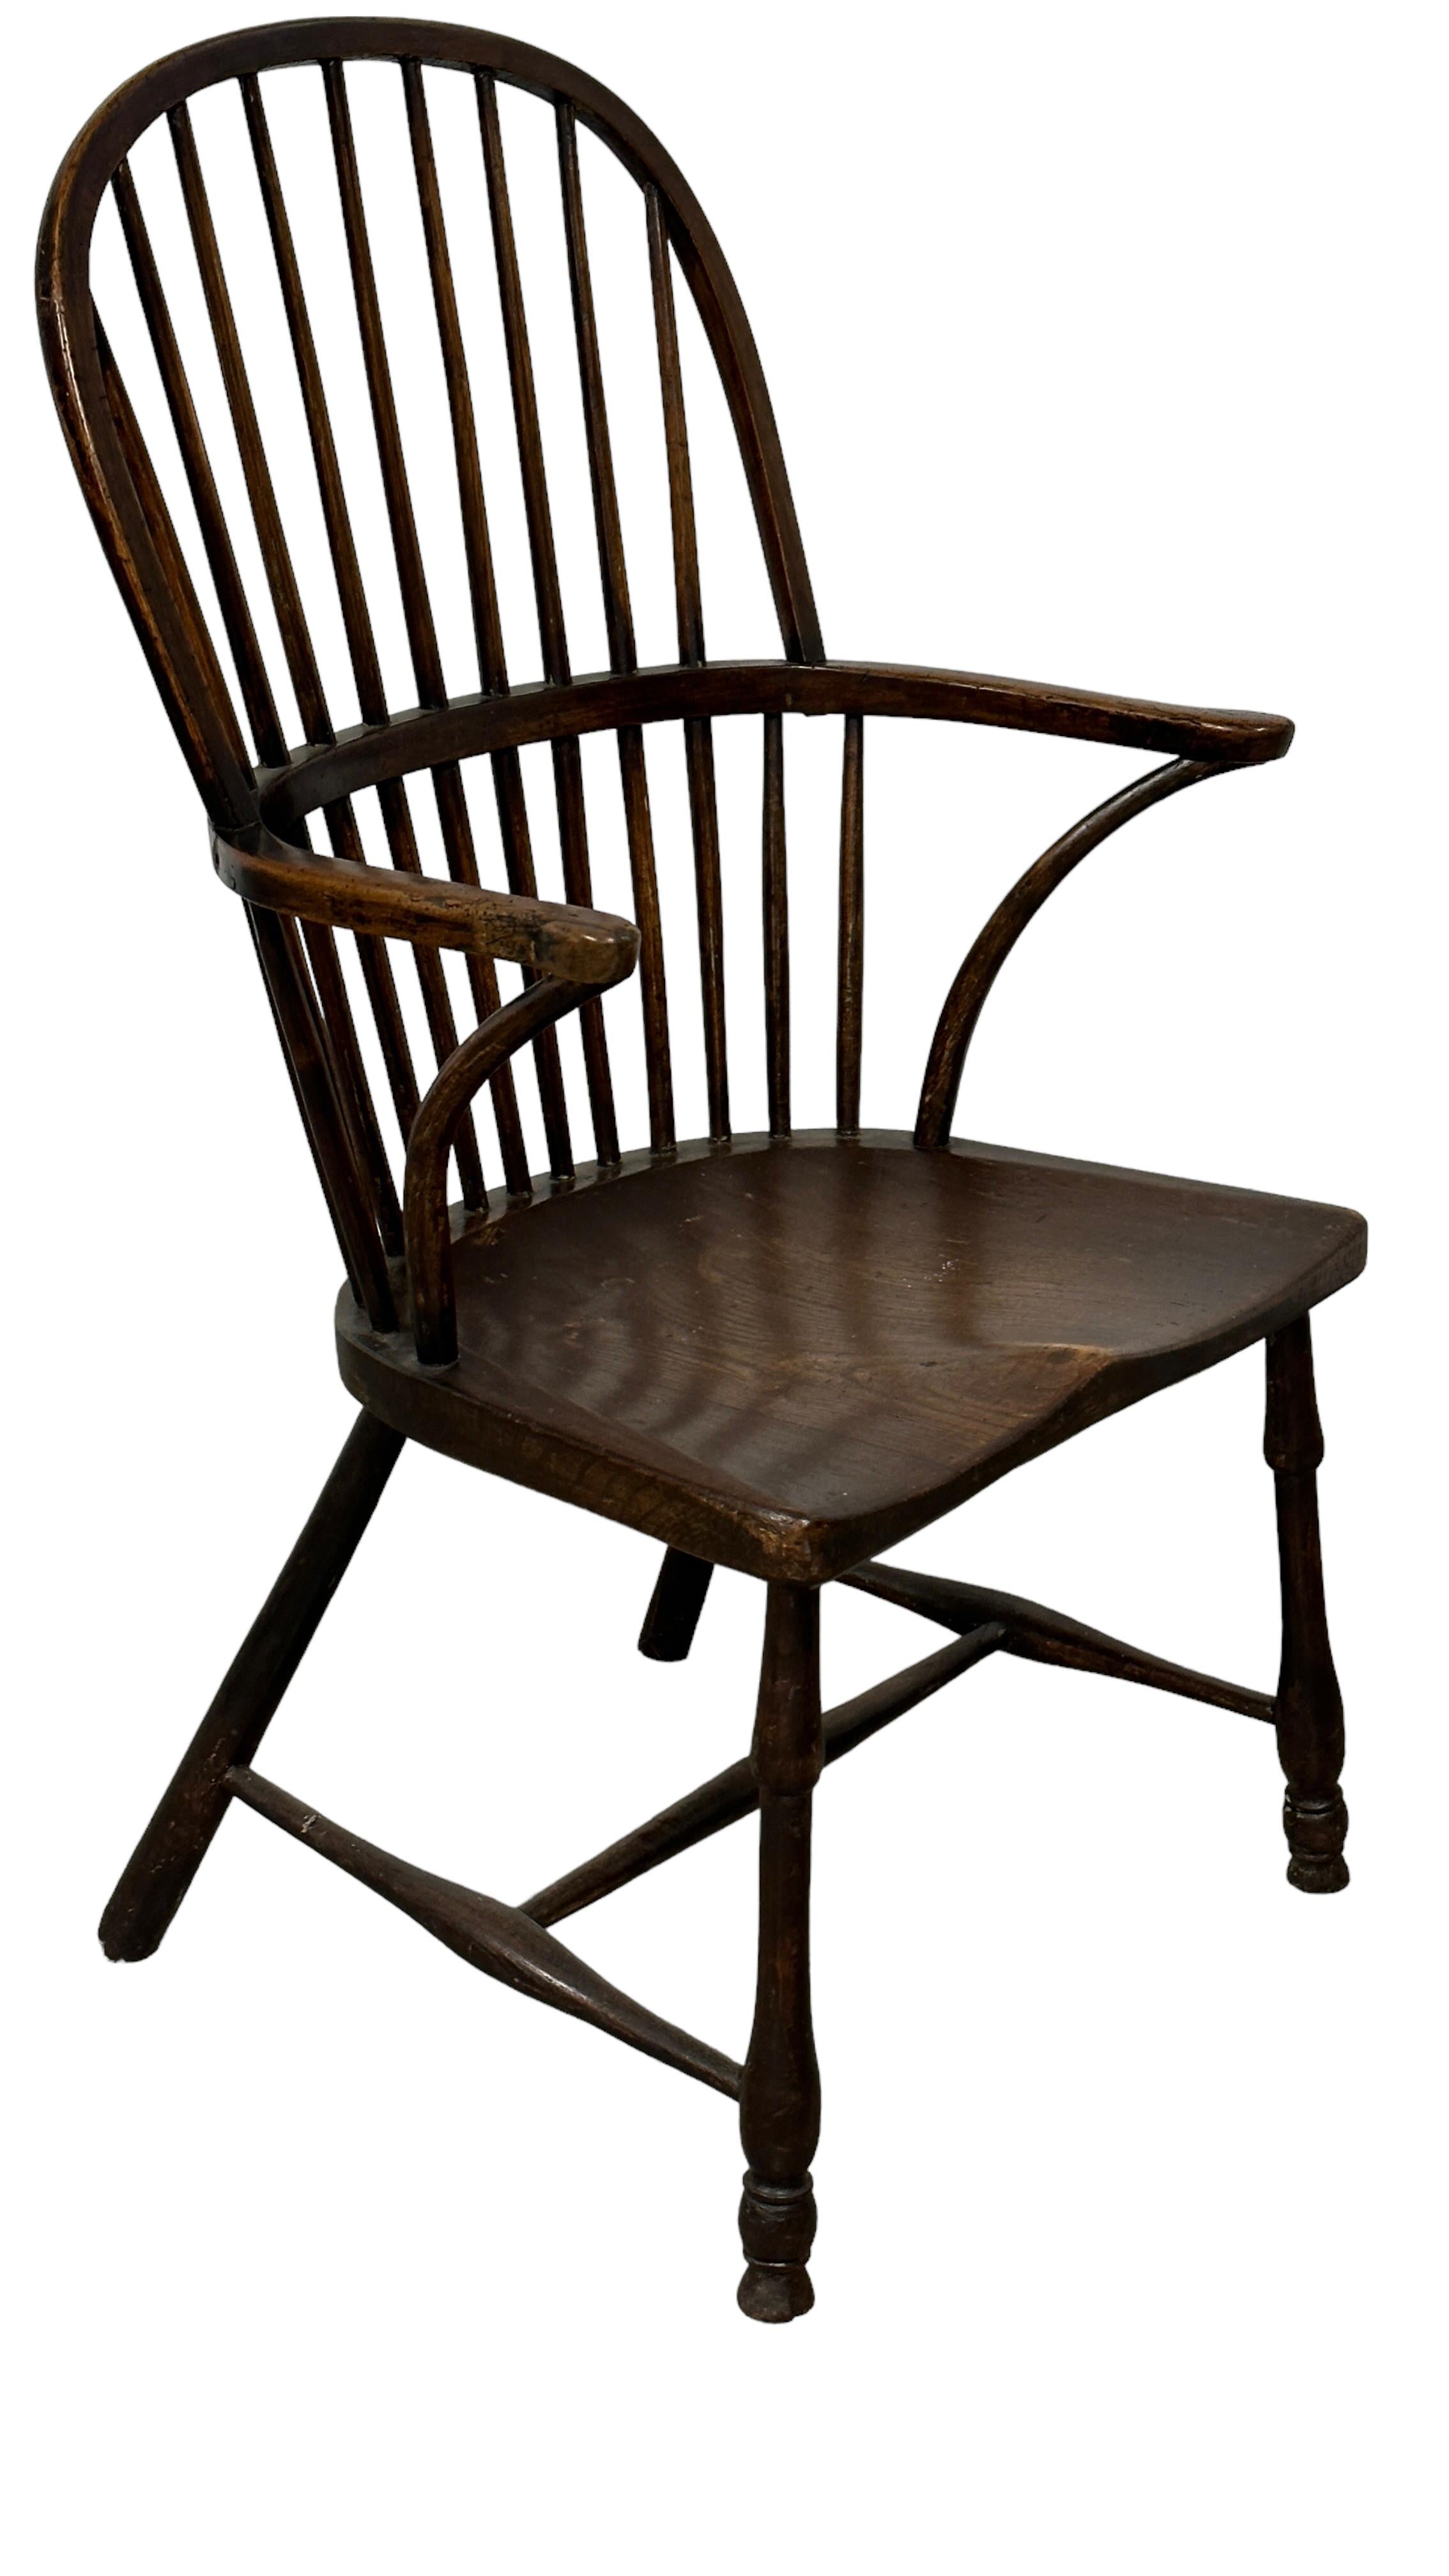 Beautiful Antique Windsor Wooden Chair, 19th Century, England 5